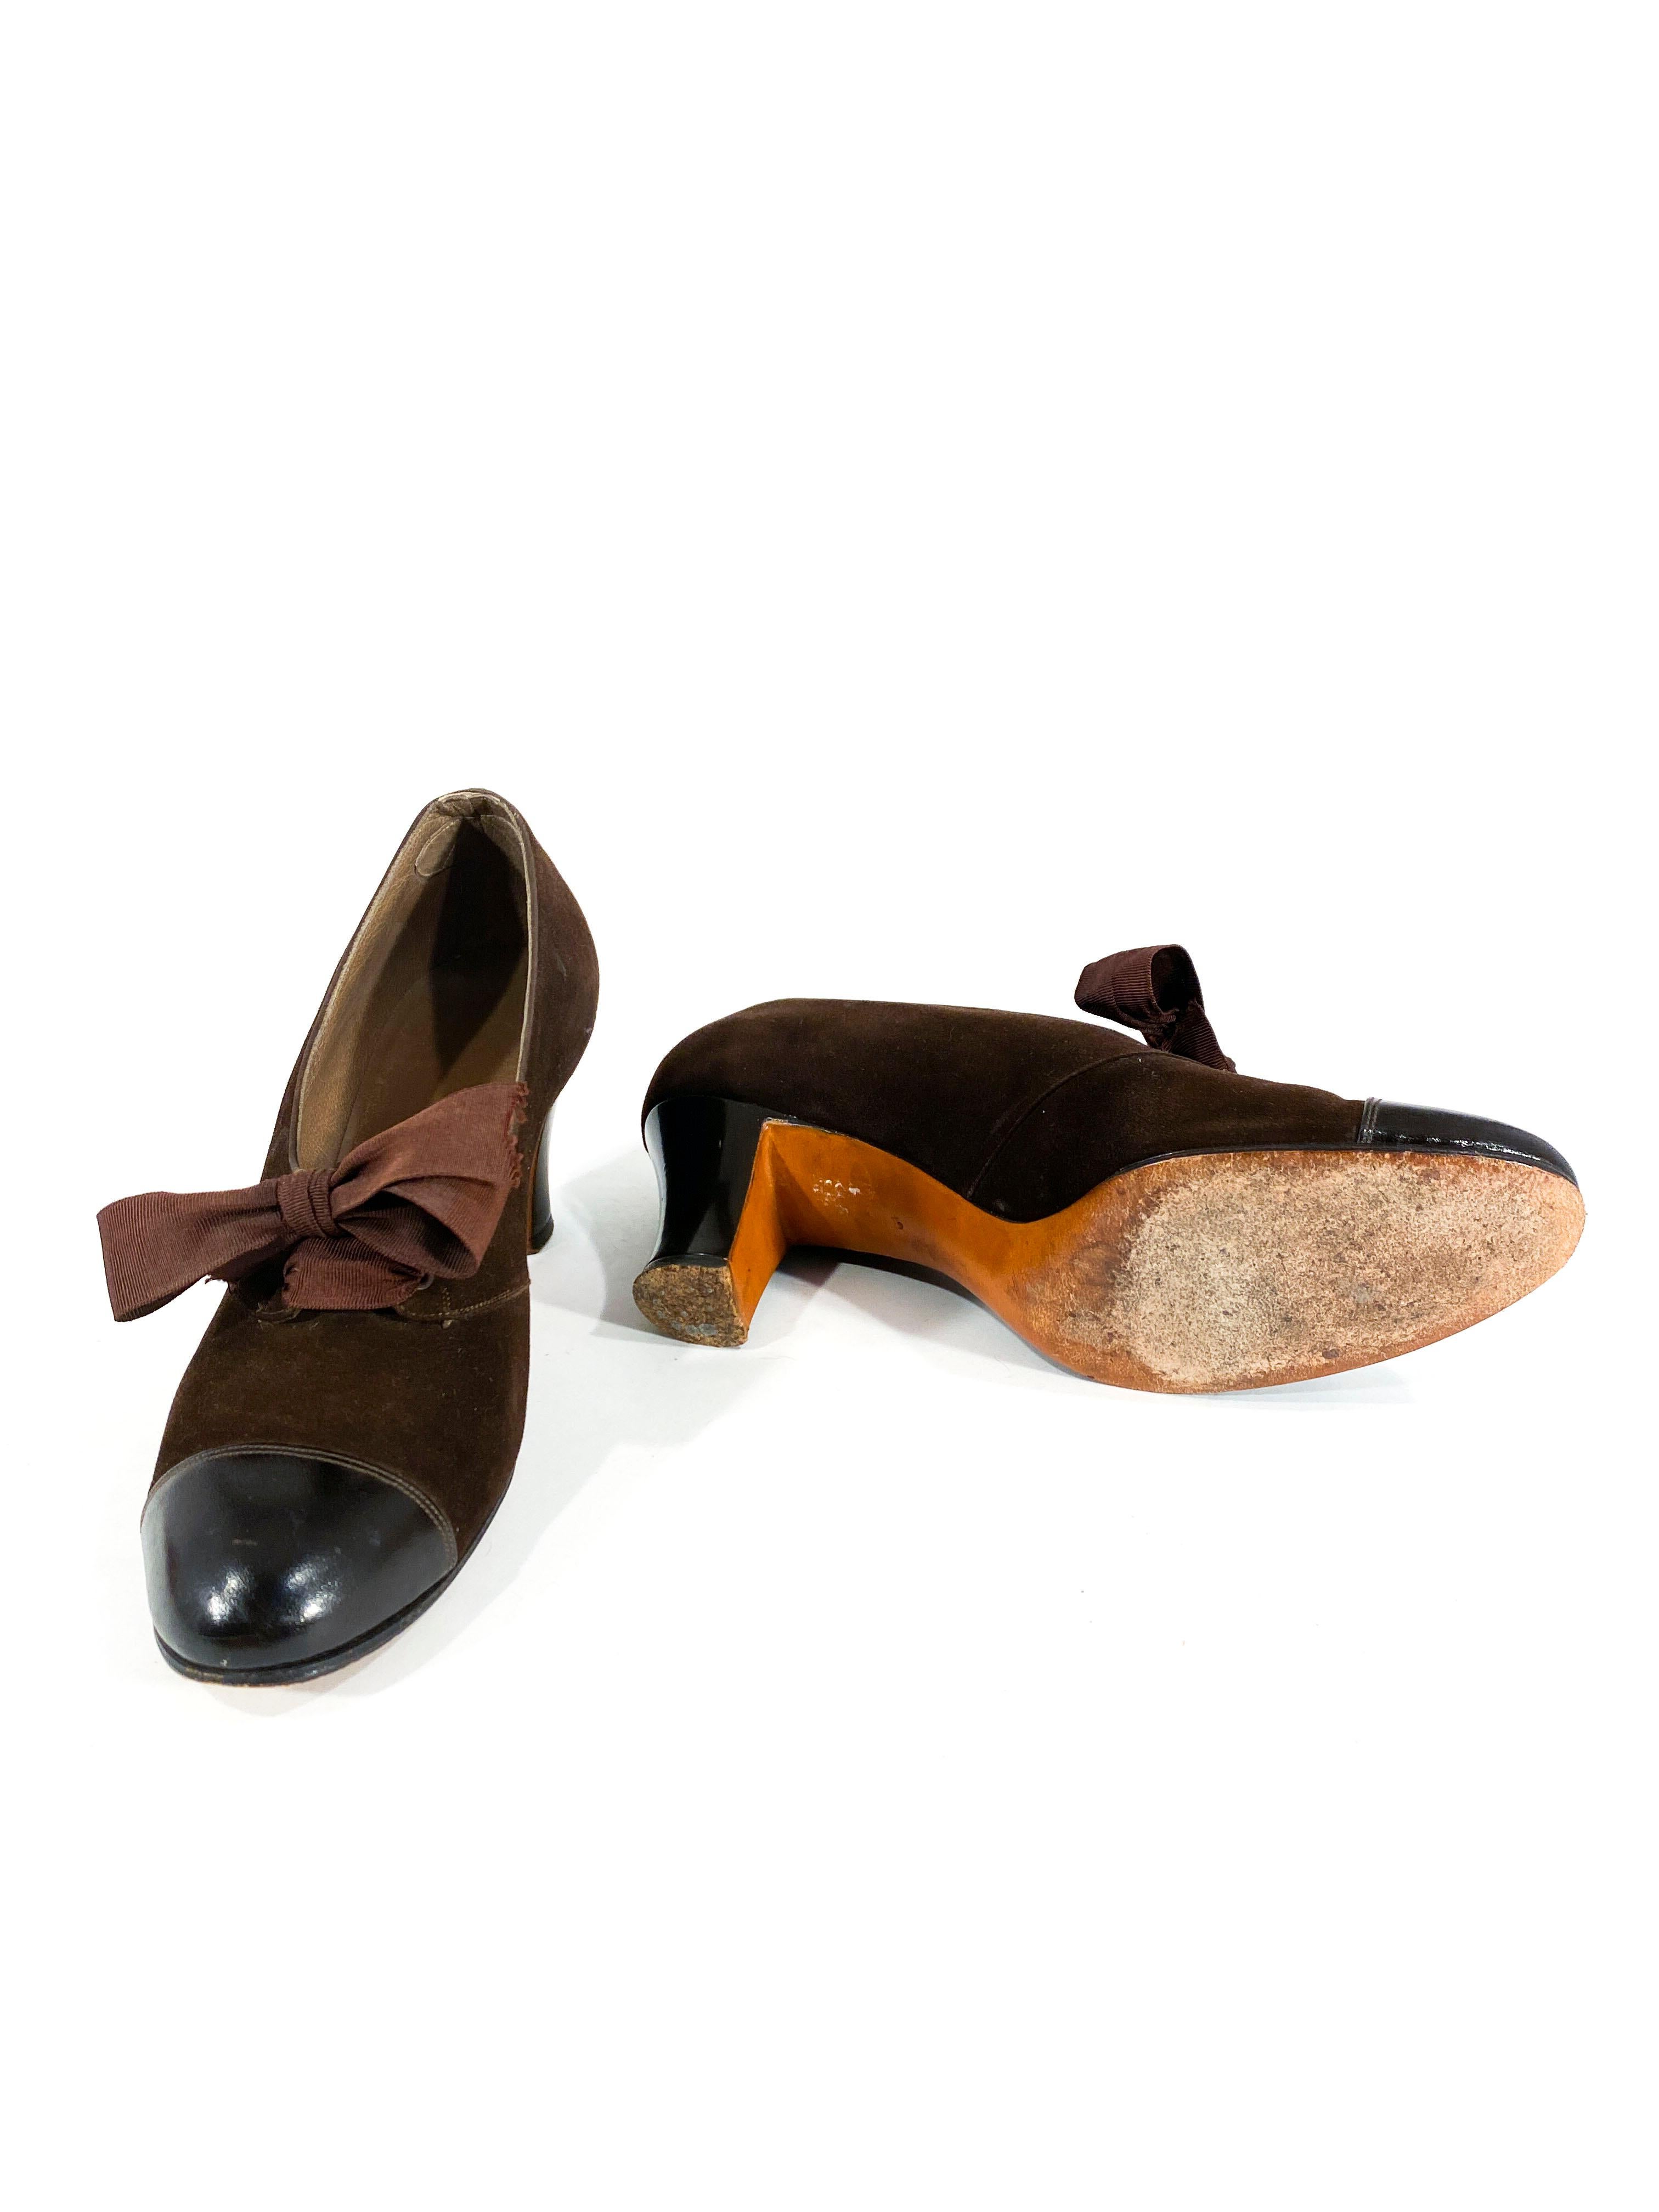 1930s Brown Suede and Leather Heels In Good Condition For Sale In San Francisco, CA